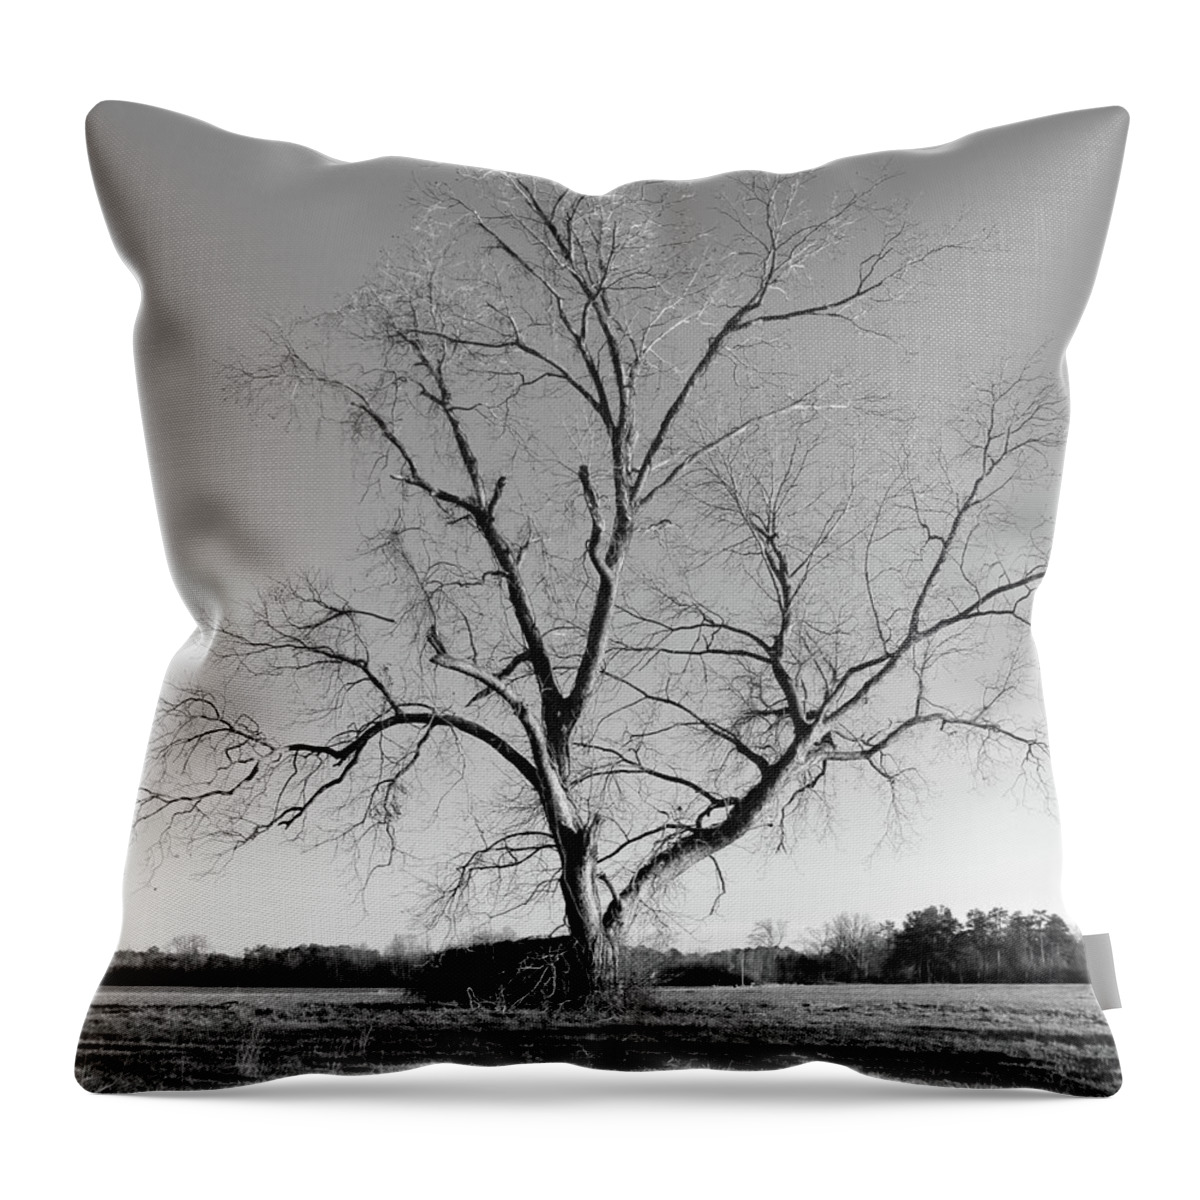 Leafless Tree Throw Pillow featuring the photograph Leafless Tree by Mike McGlothlen